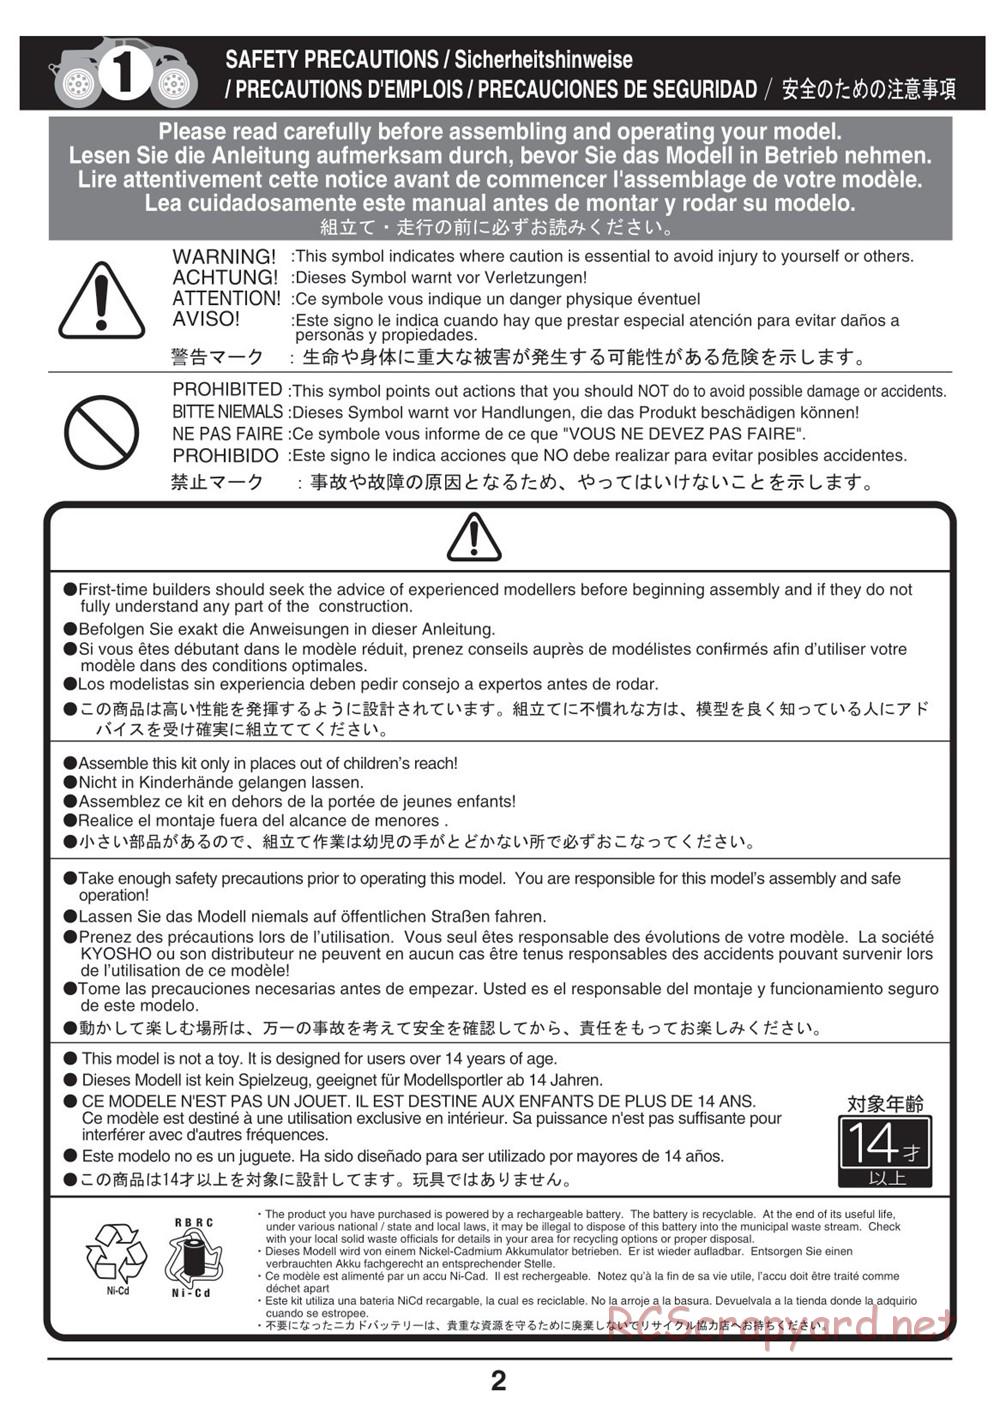 Kyosho - Mini-Z Monster Truck - Manual - Page 2